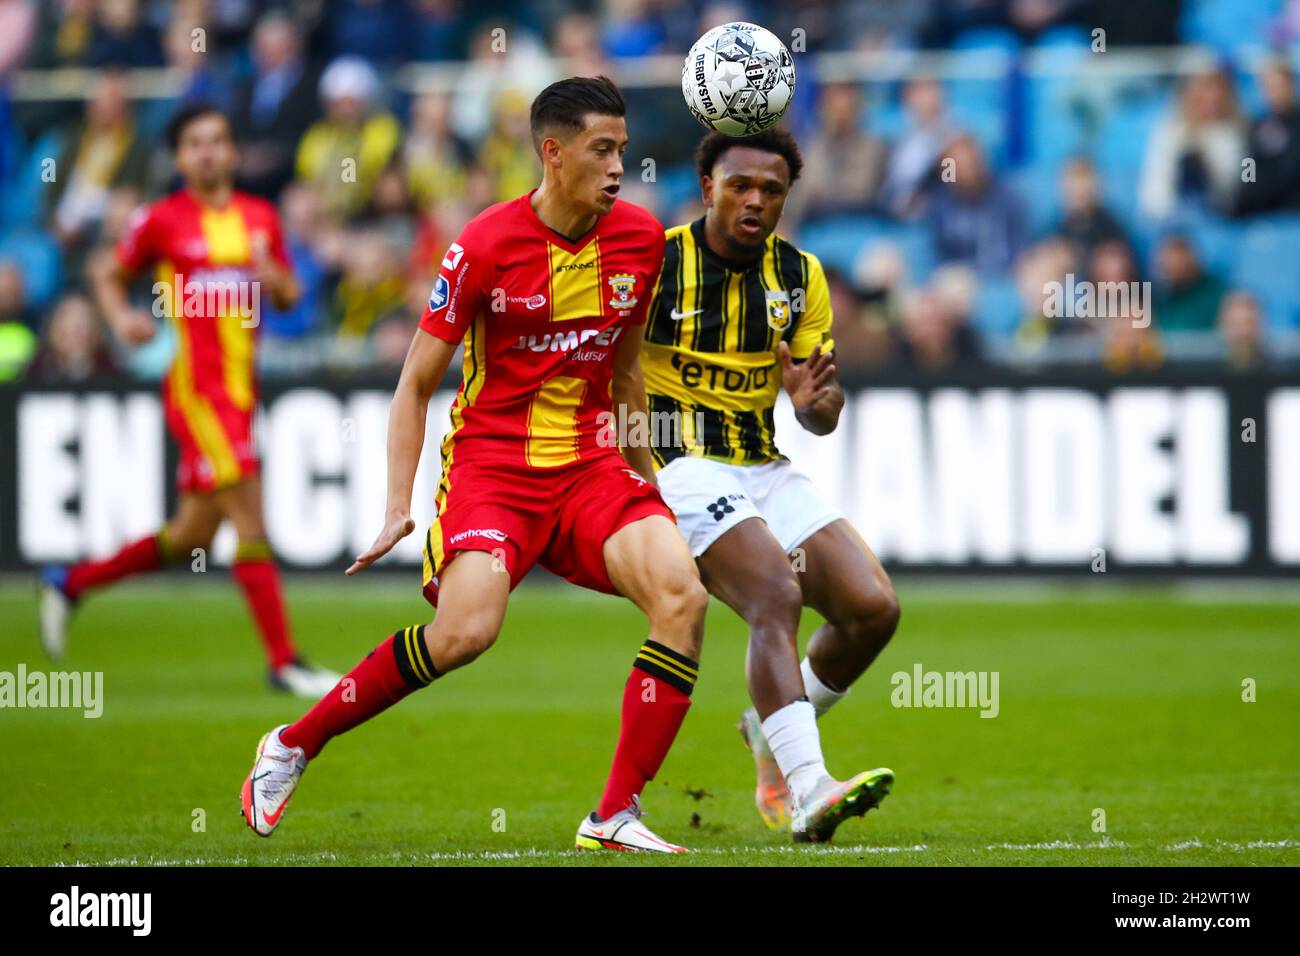 ARNHEM, NETHERLANDS - OCTOBER 24: Jay Idzes of Go Ahead Eagles and Lois Openda of Vitesse battle for possession during the Dutch Eredivisie match between Vitesse and Go Ahead Eagles at the Gelredome on October 24, 2021 in Arnhem, Netherlands (Photo by Ben Gal/Orange Pictures) Stock Photo